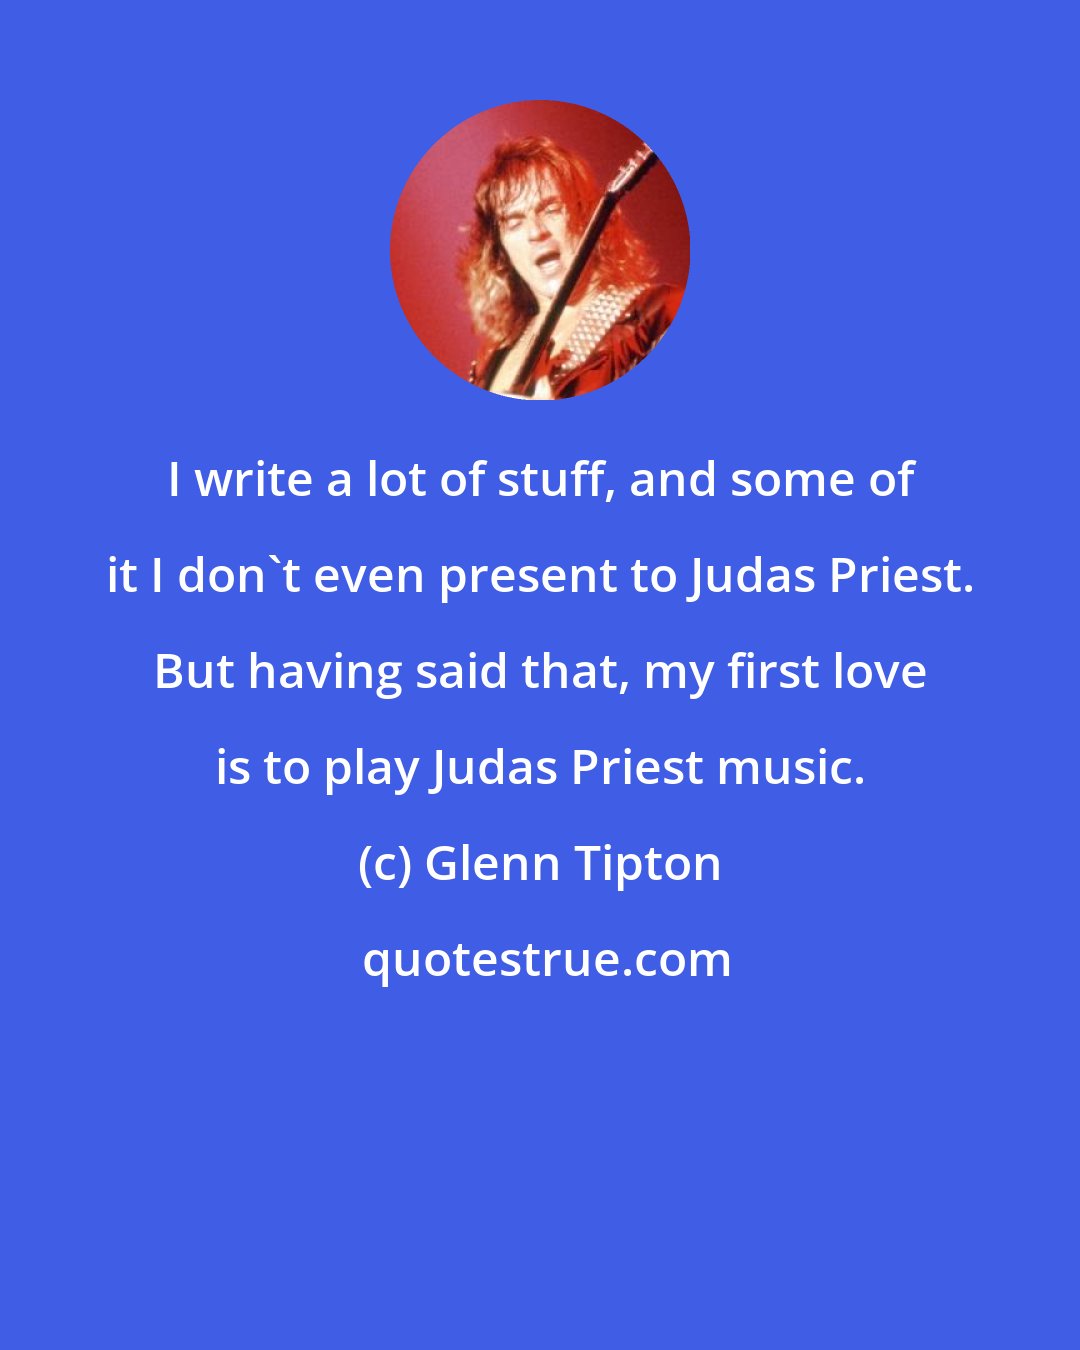 Glenn Tipton: I write a lot of stuff, and some of it I don't even present to Judas Priest. But having said that, my first love is to play Judas Priest music.